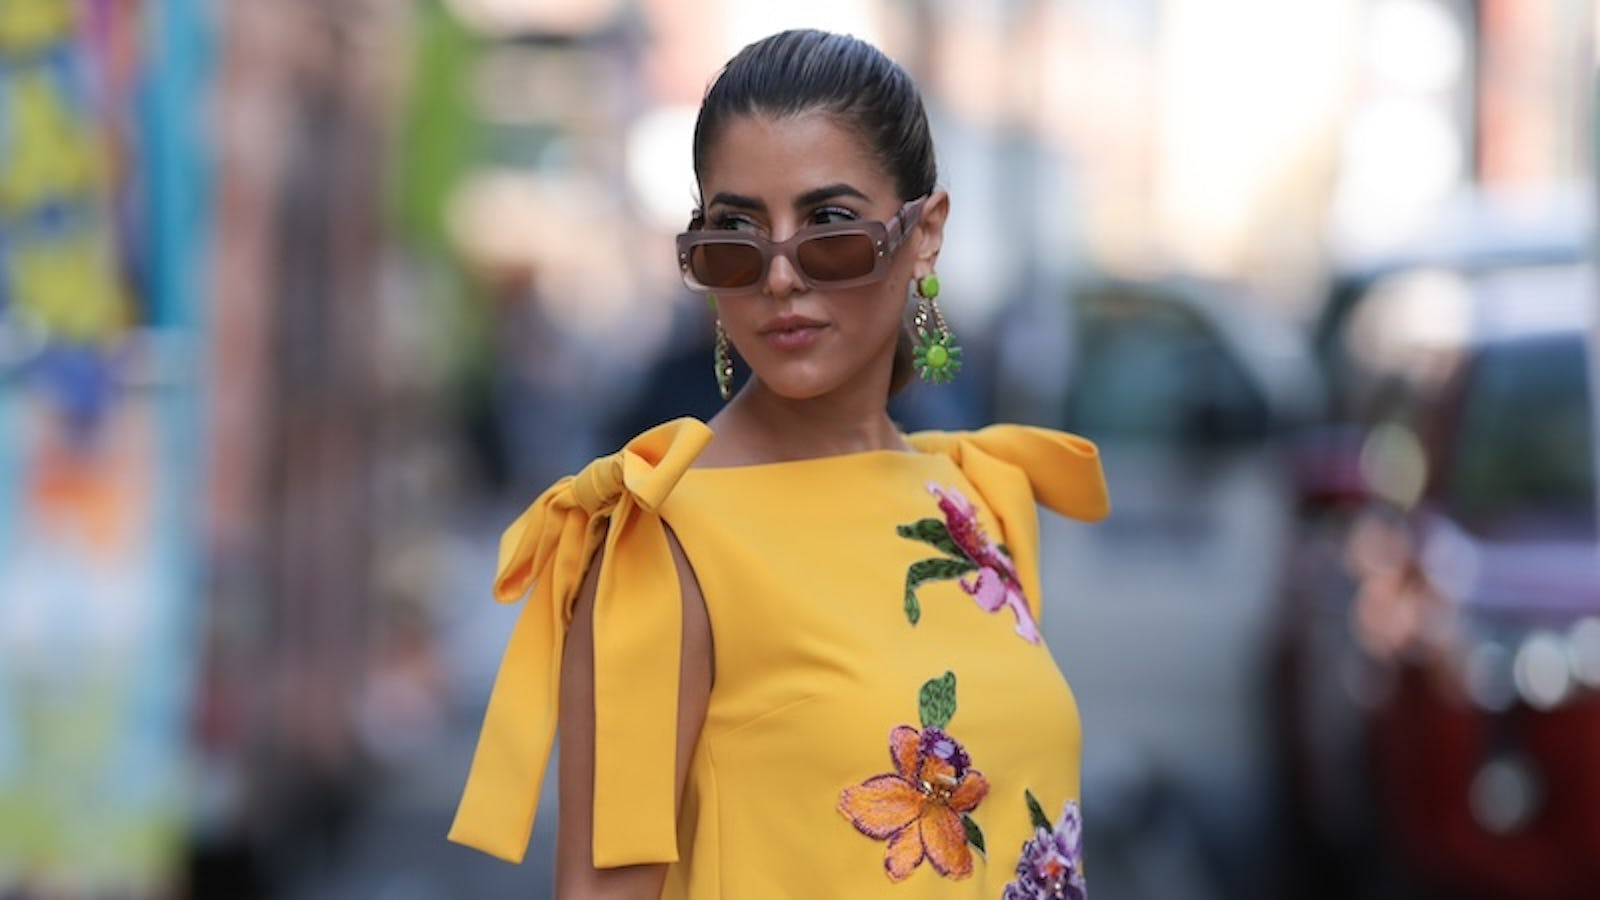 NEW YORK, NEW YORK - SEPTEMBER 12: A Fashion Week guest is seen wearing beige sunglasses from Carolina Herrera, green flower earrings, a sleeveless yellow mini dress with floral embroideries, an orange leather bag from Carolina Herrera before the Carolina Herrera Spring Summer 2024 Runway Show on September 12, 2023 in New York City. (Photo by Jeremy Moeller/Getty Images)